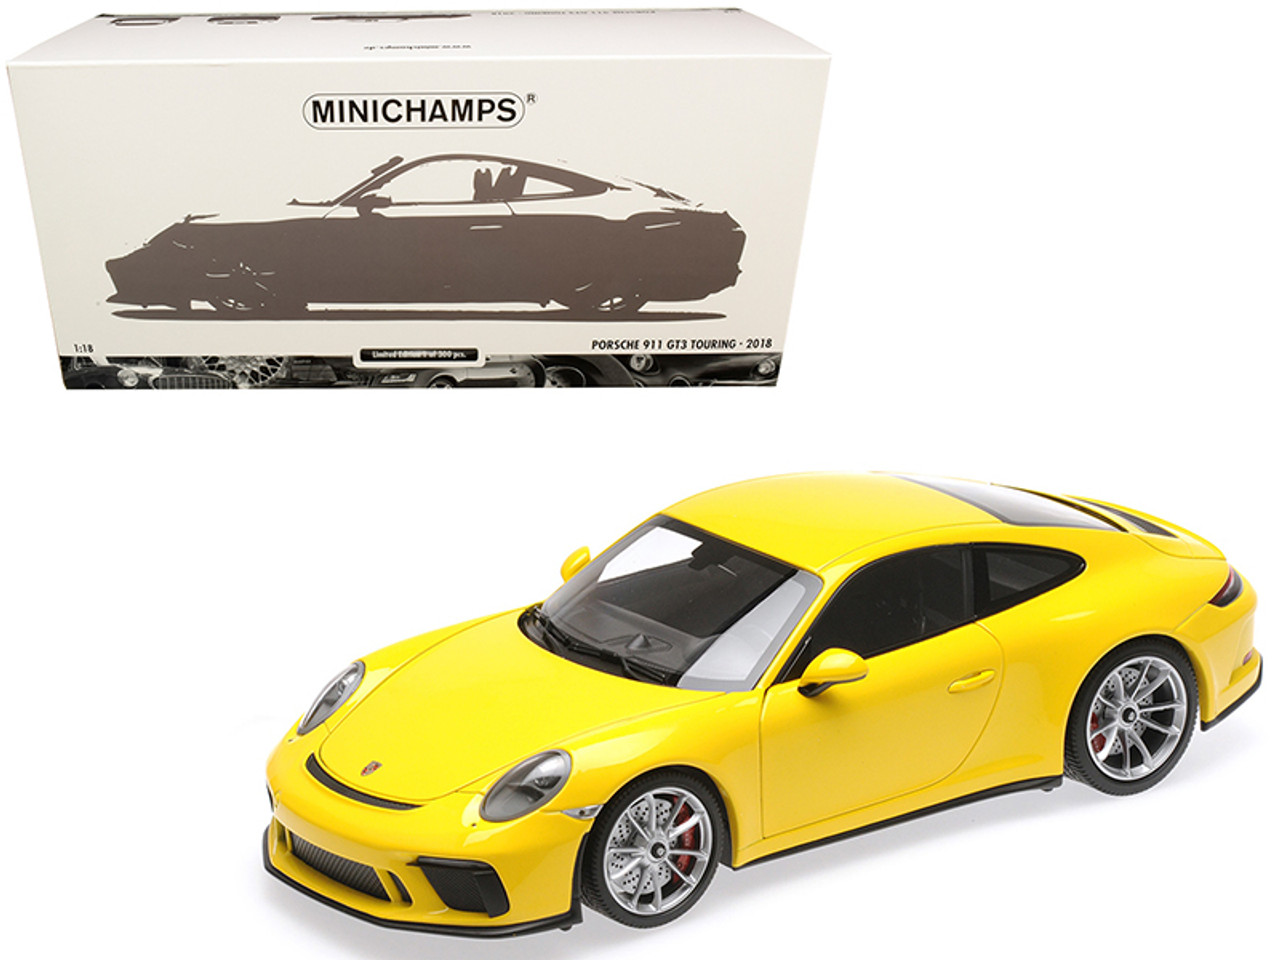 2018 Porsche 911 GT3 Touring Yellow Limited Edition to 300 pieces Worldwide 1/18 Diecast Model Car by Minichamps